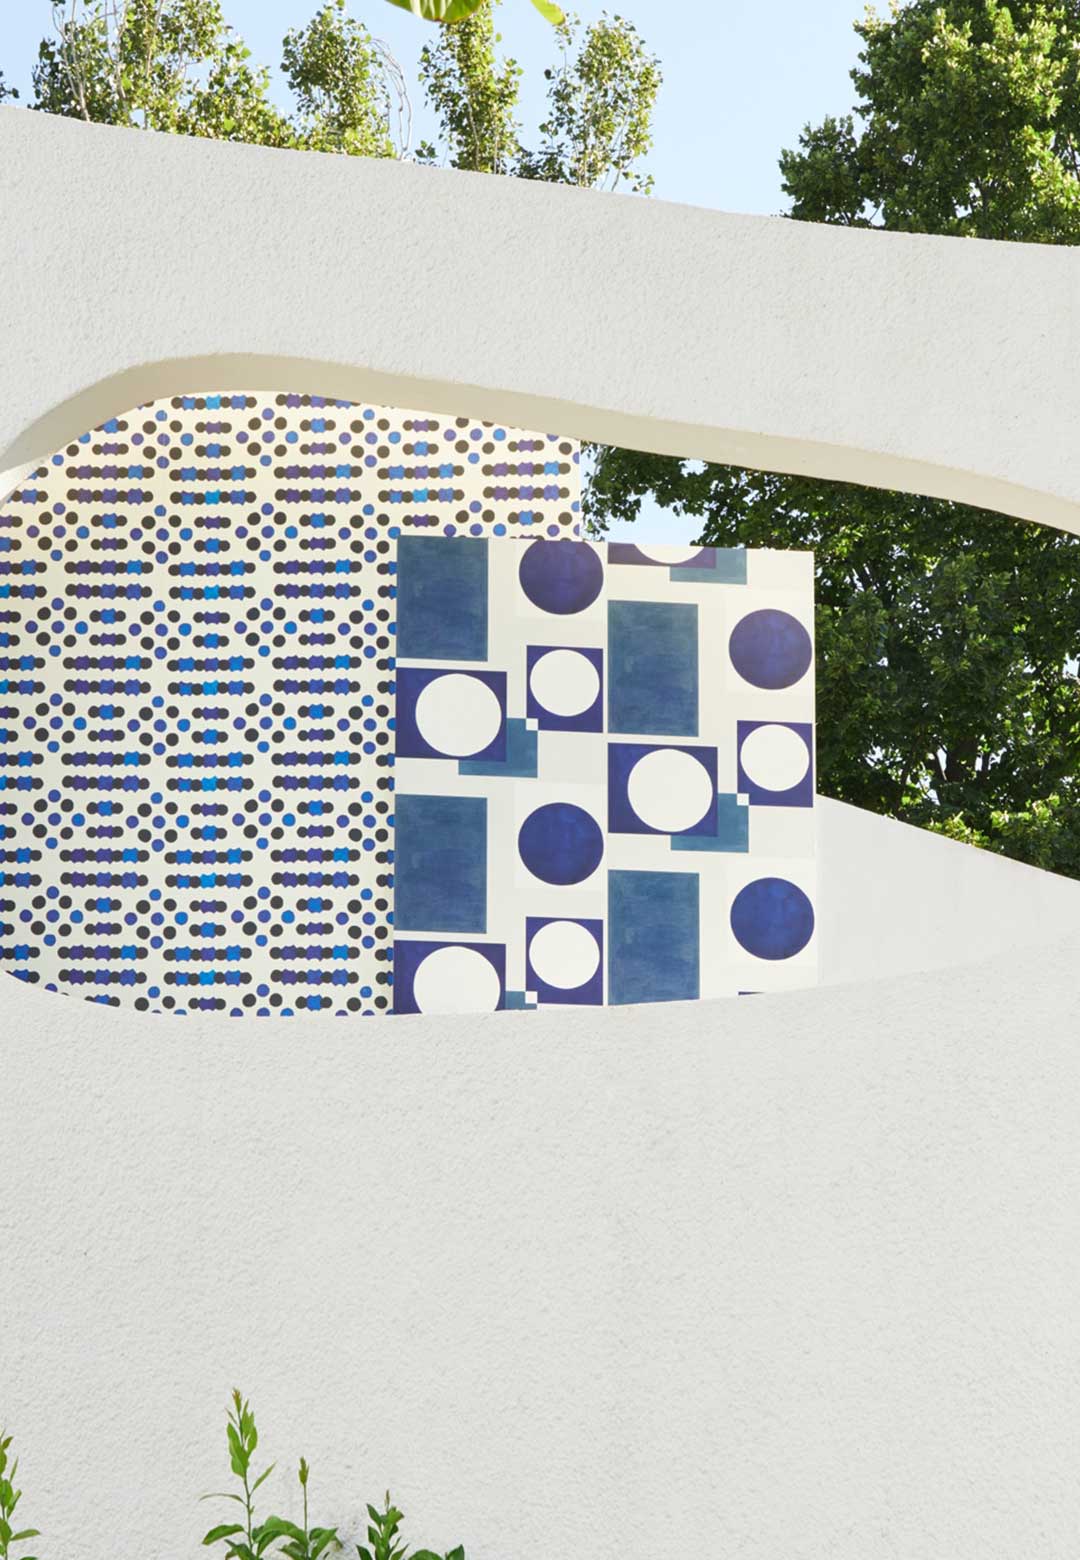 Diptyque collaborates with Cécile Figuette to create bold wall coverings